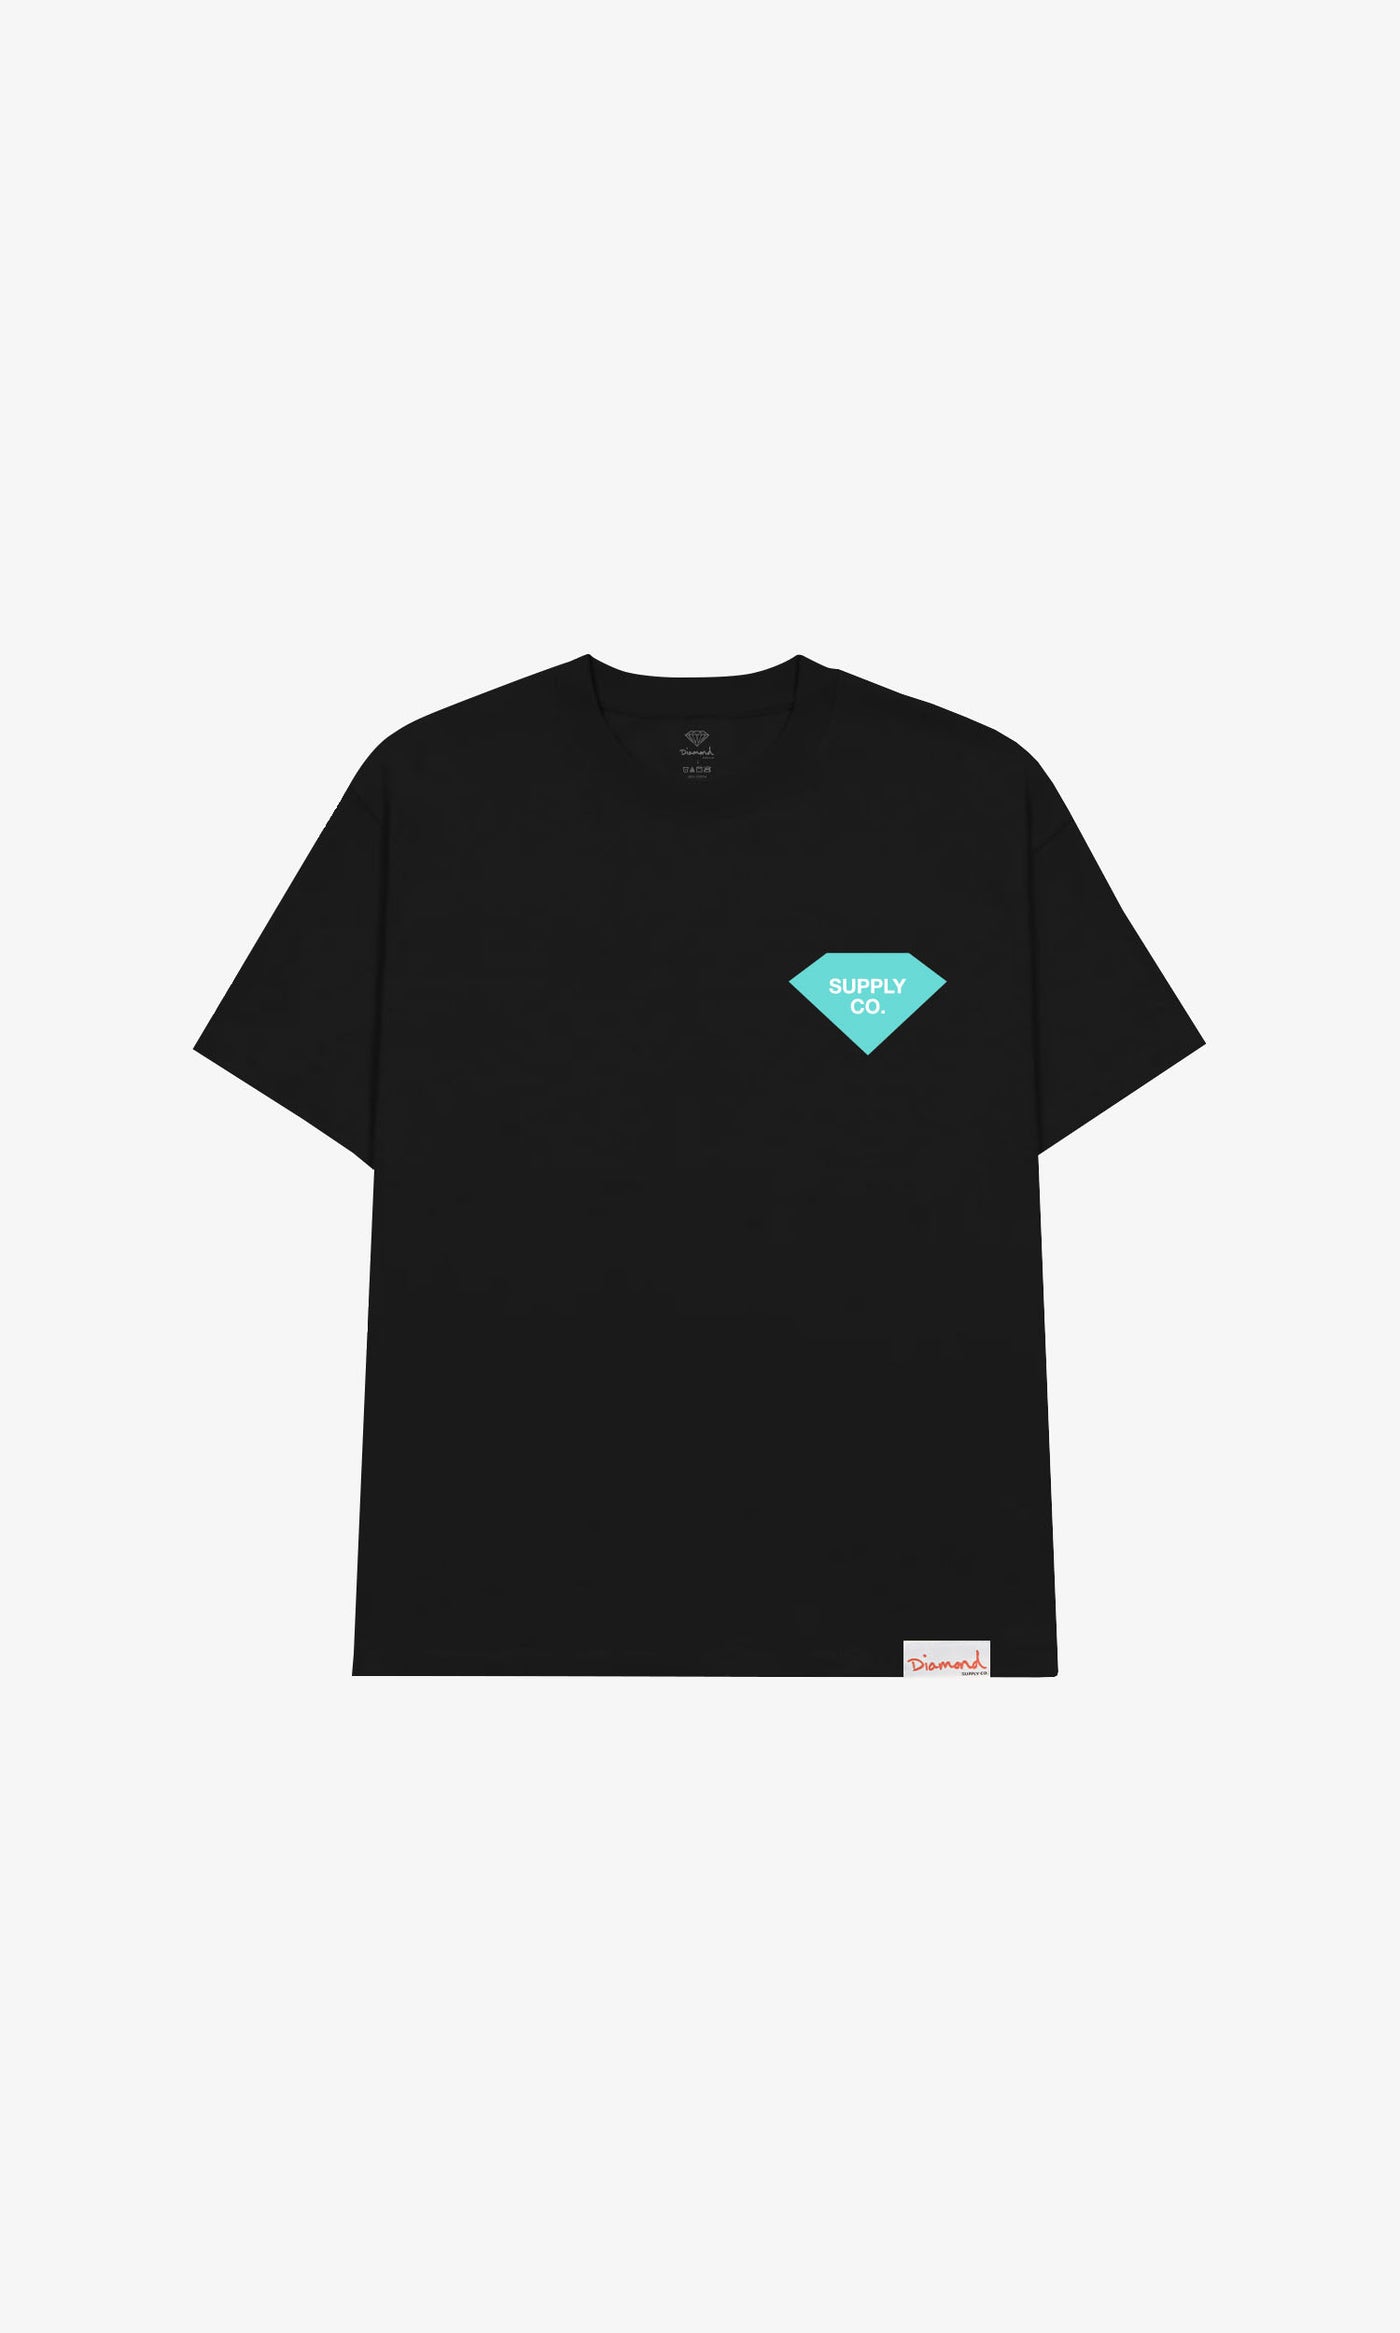 SILHOUETTE SUPPLY CO TEE - BLACK